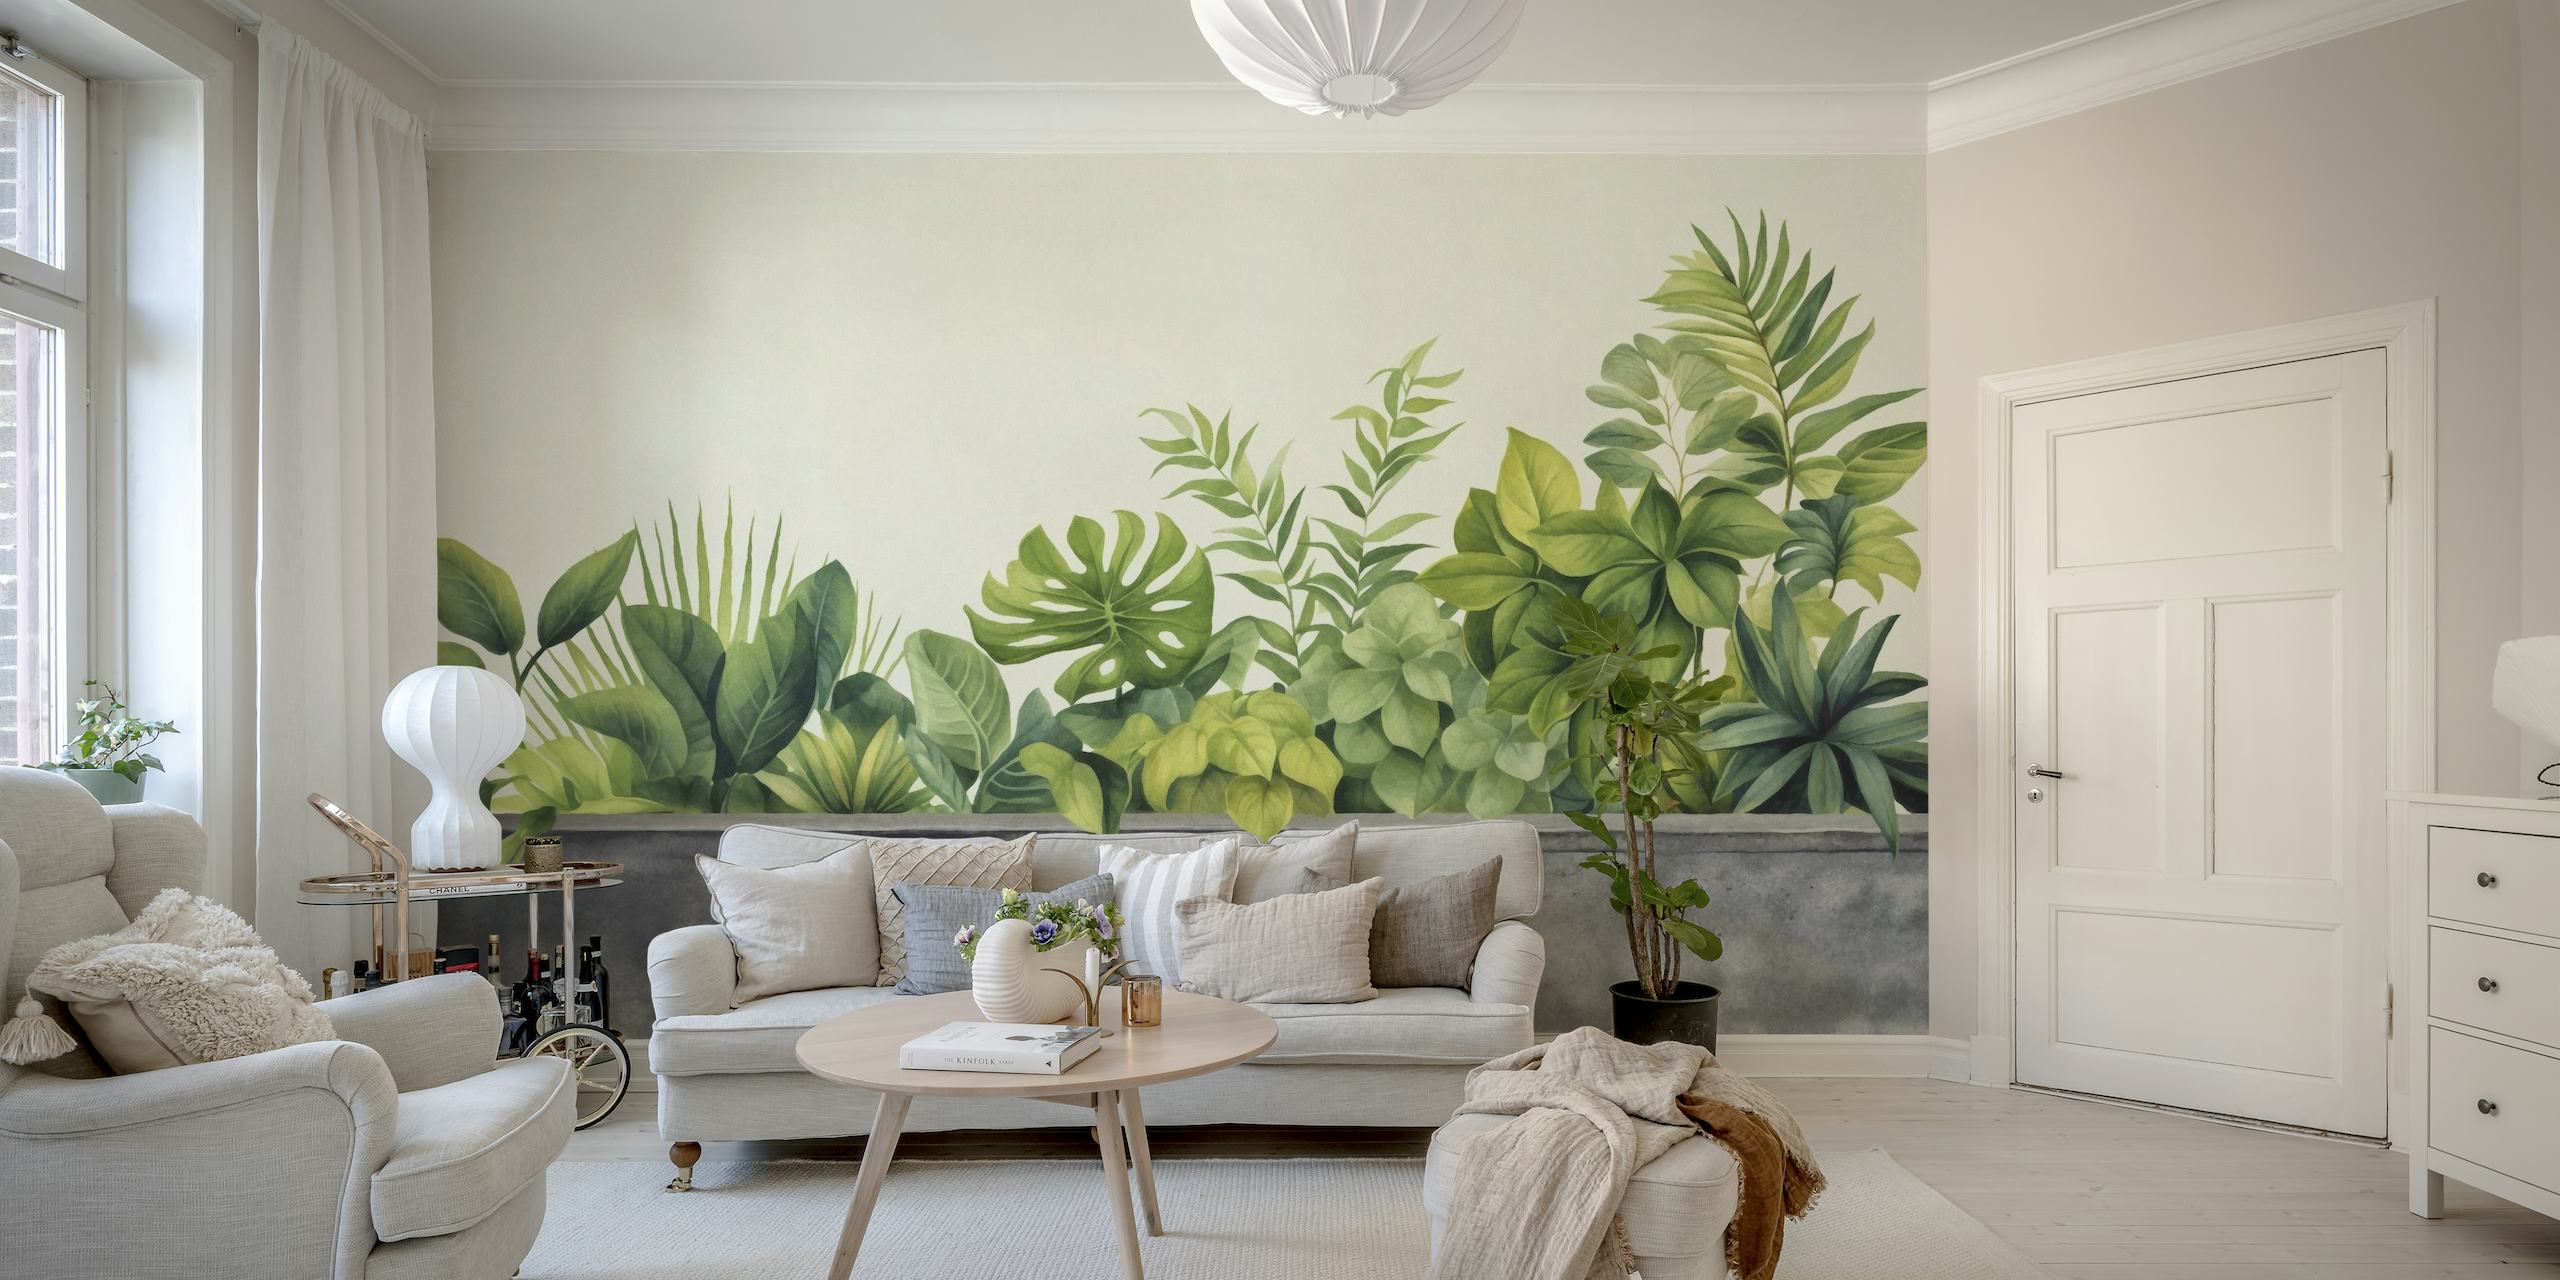 Urban Gardening Tropical Green Watercolor wall mural with lush foliage over grey background